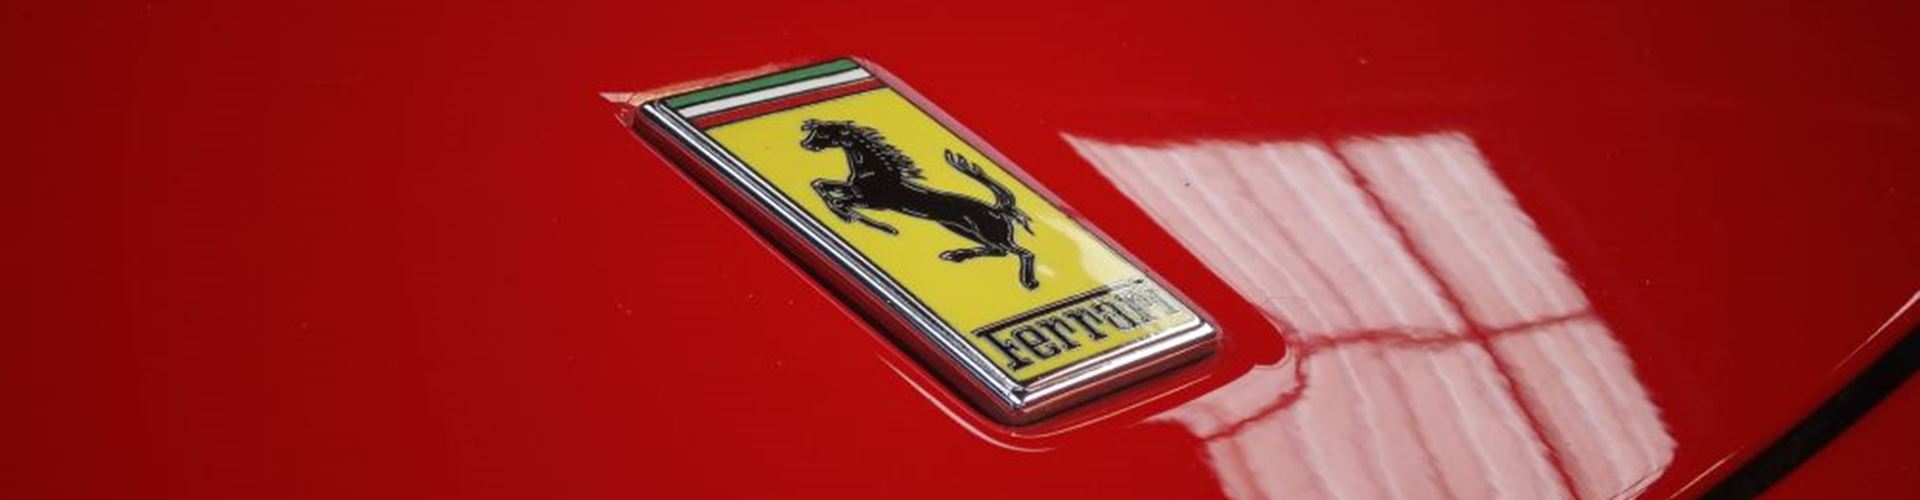 Want to own a part of Ferrari? Here’s your chance!